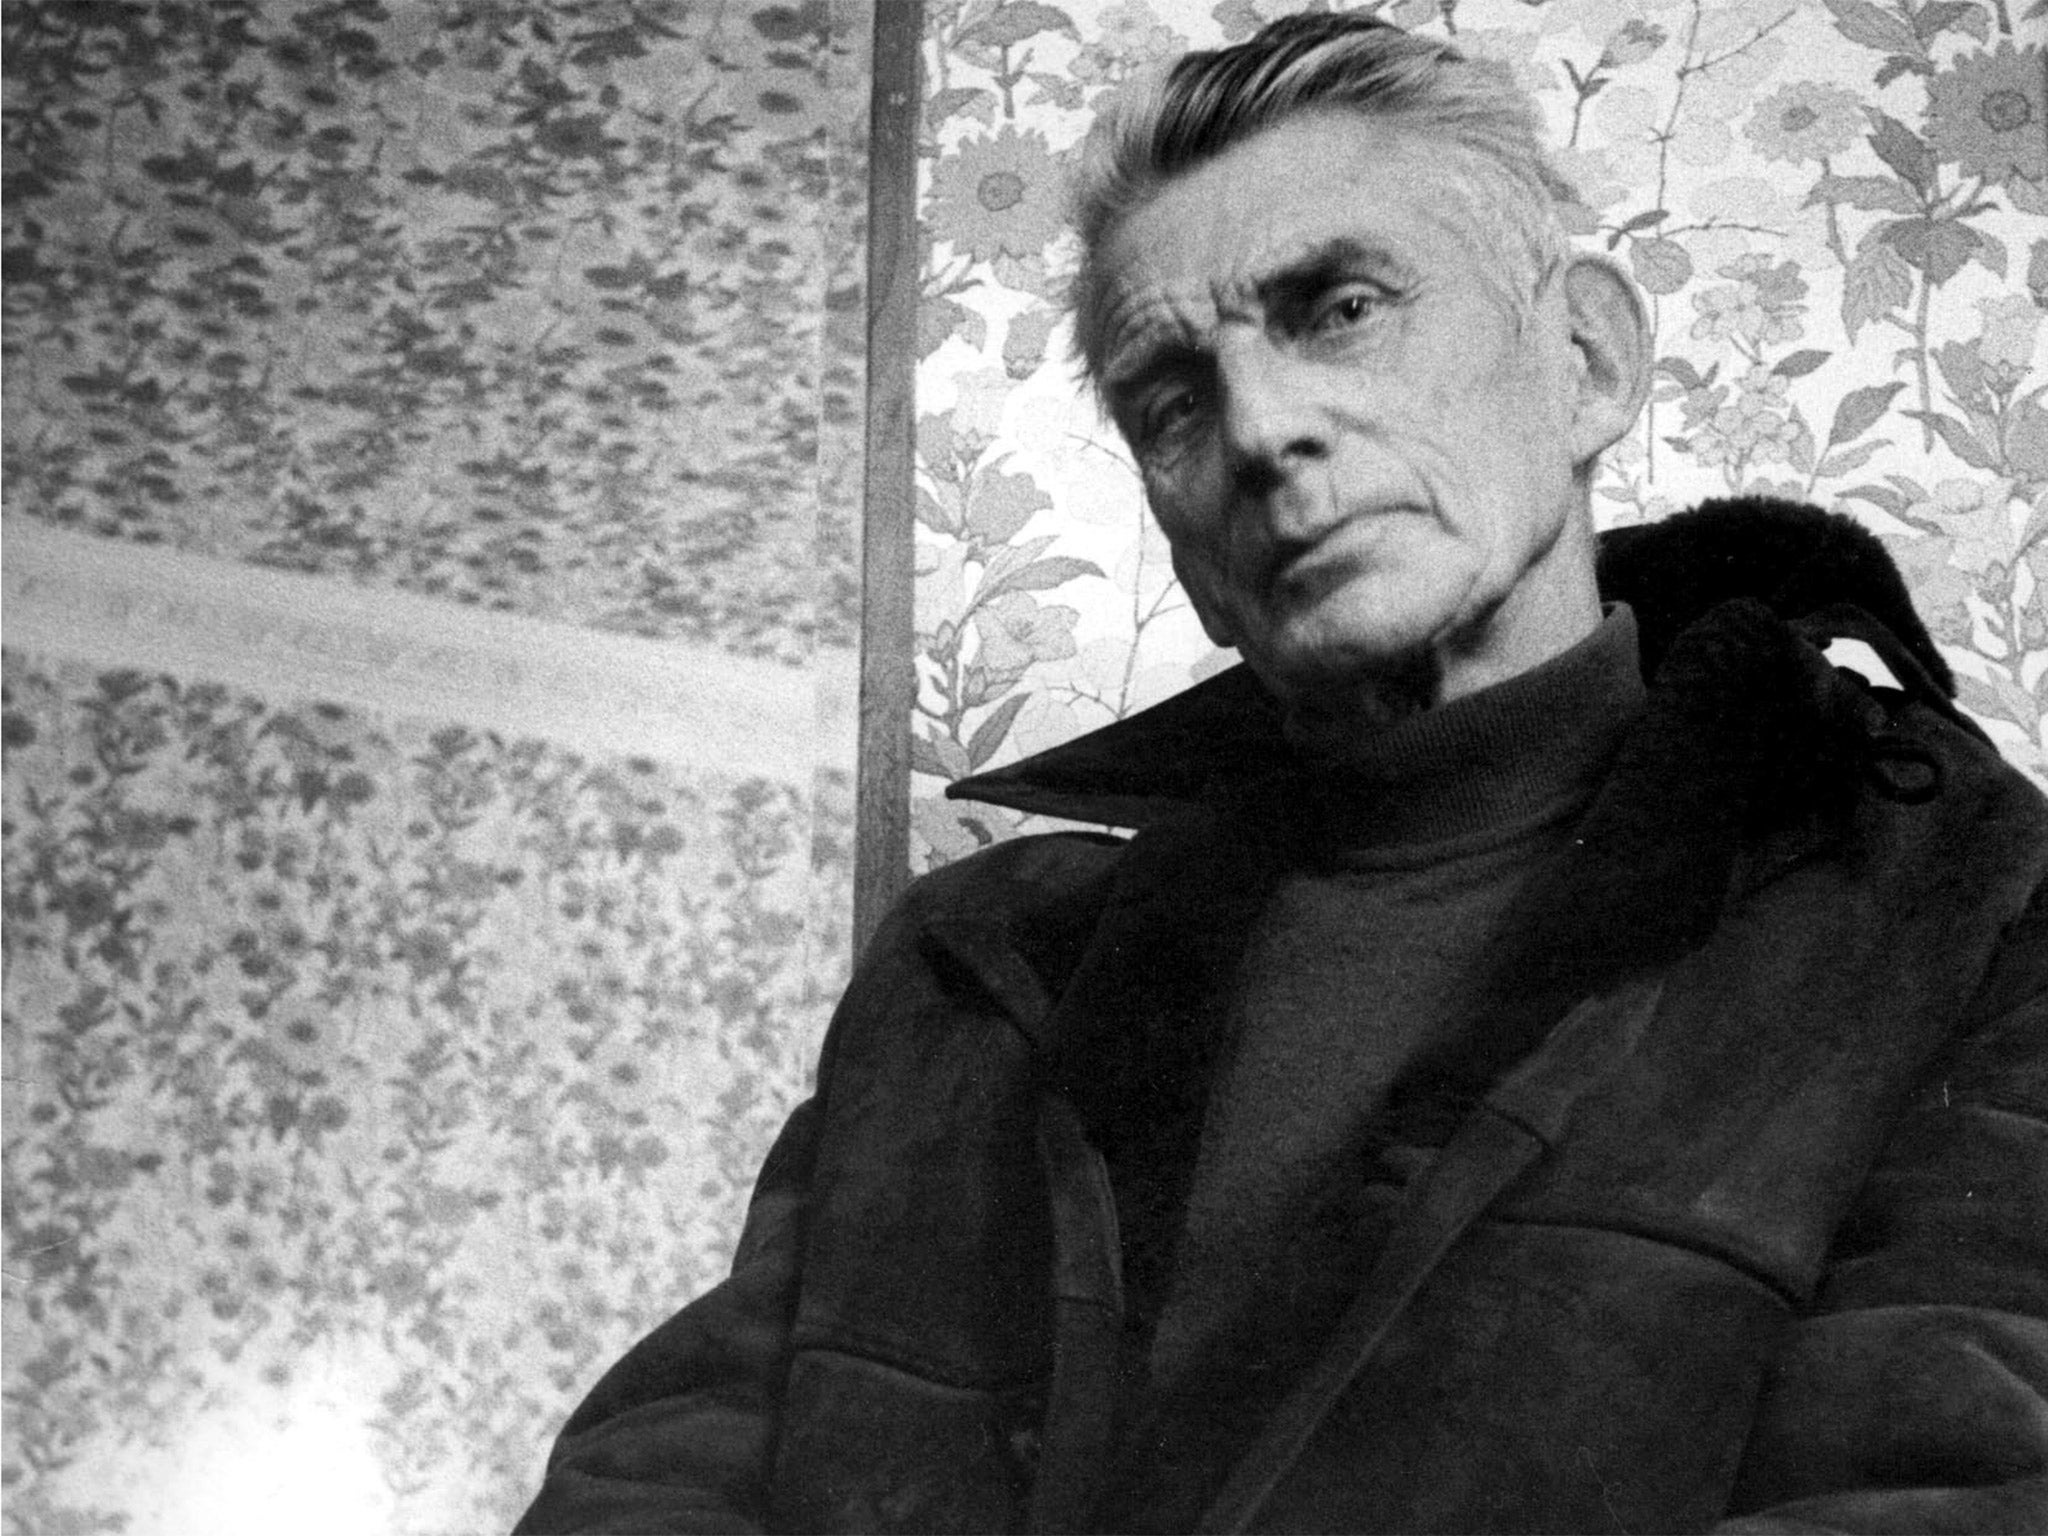 Beckett and his future wife Suzanne escaped from the Gestapo by the skin of their teeth